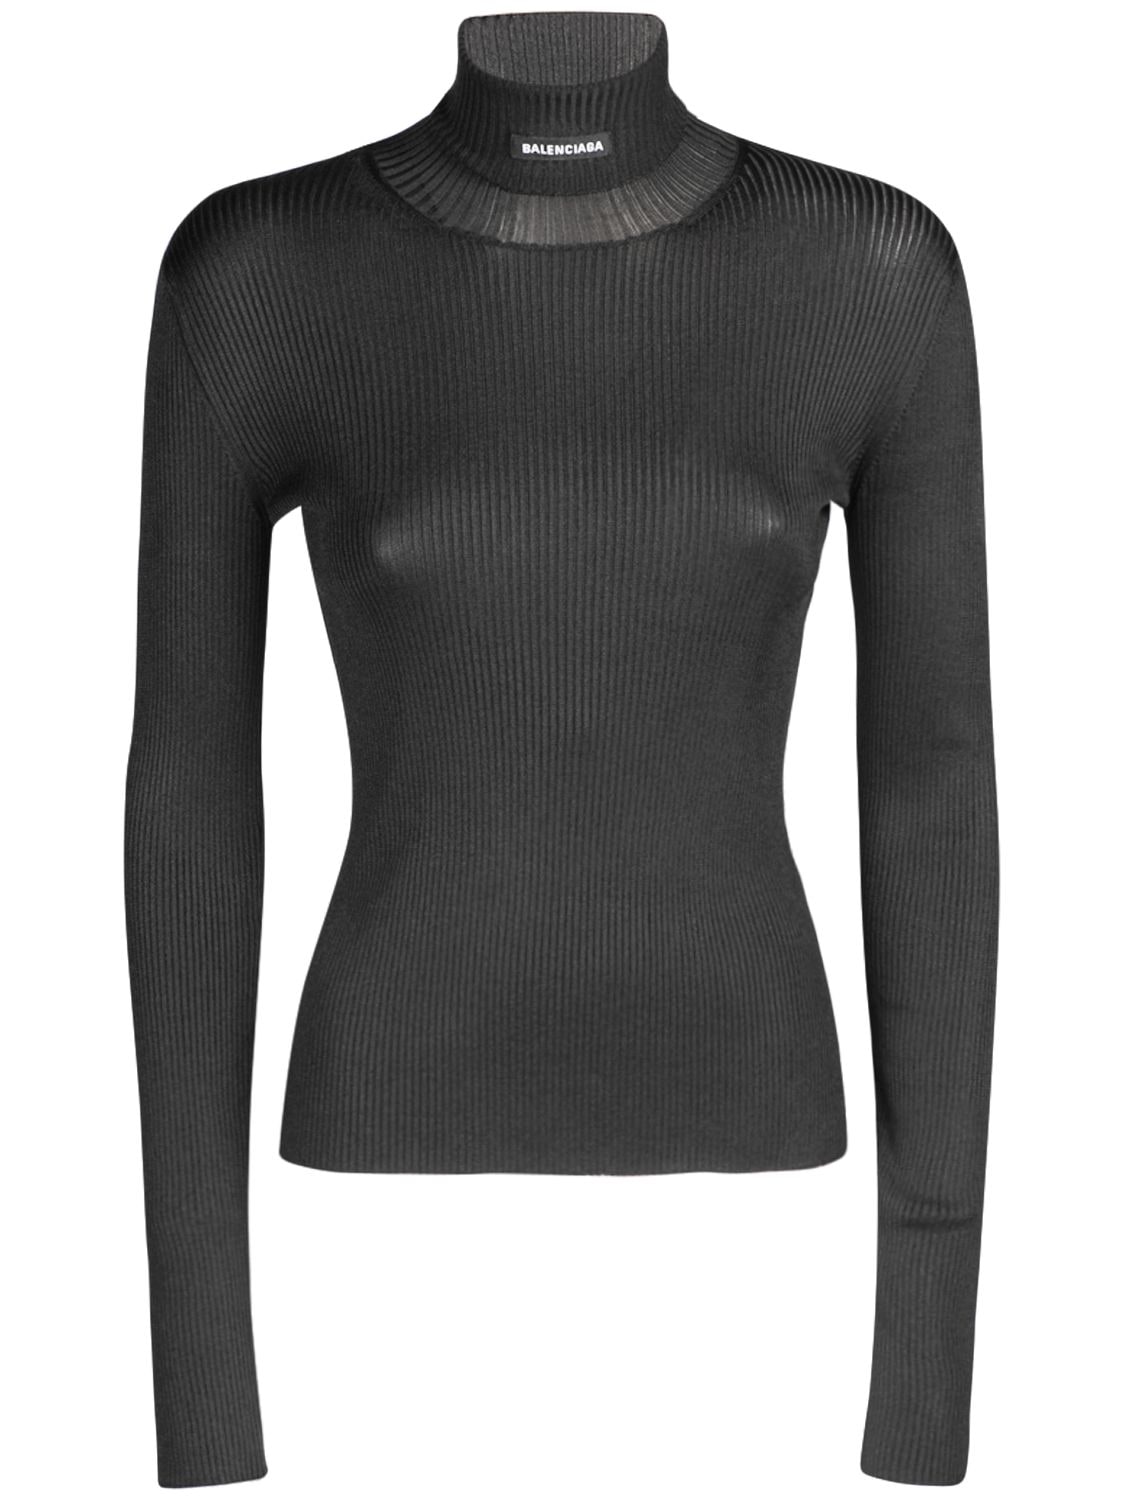 Ribbed Knit Tech Turtleneck Sweater